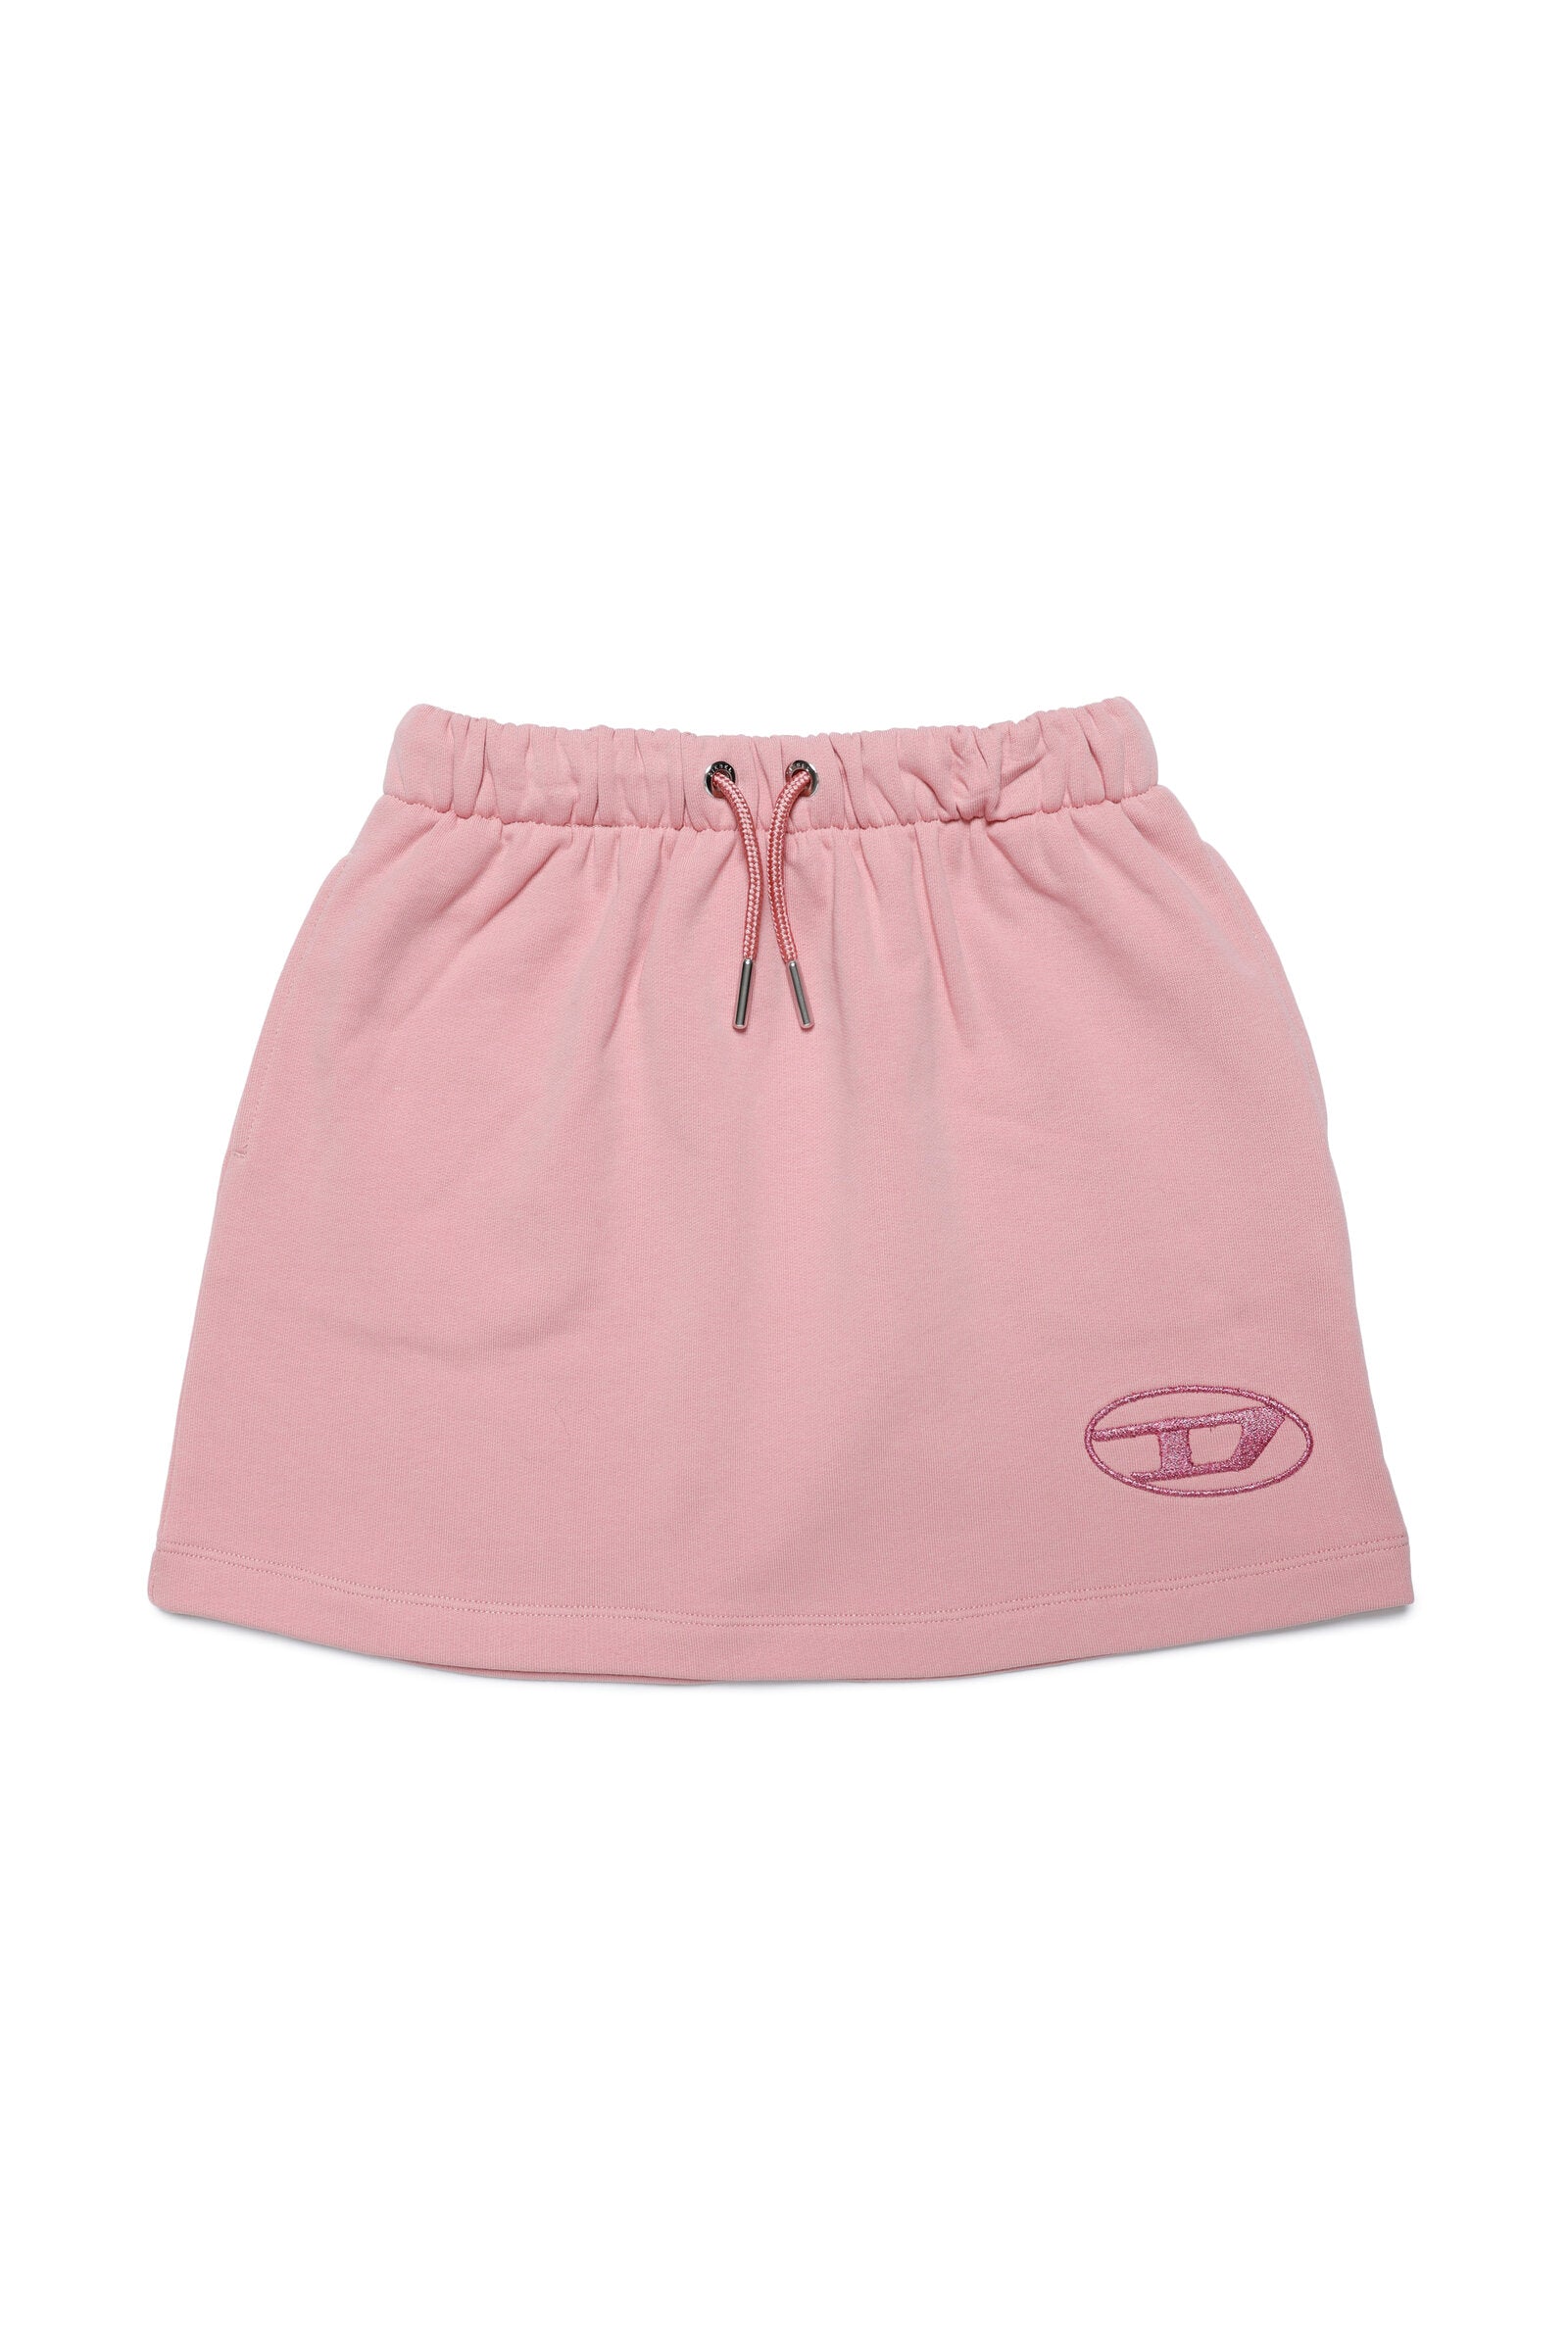 Cotton skirt with Oval D glittery logo